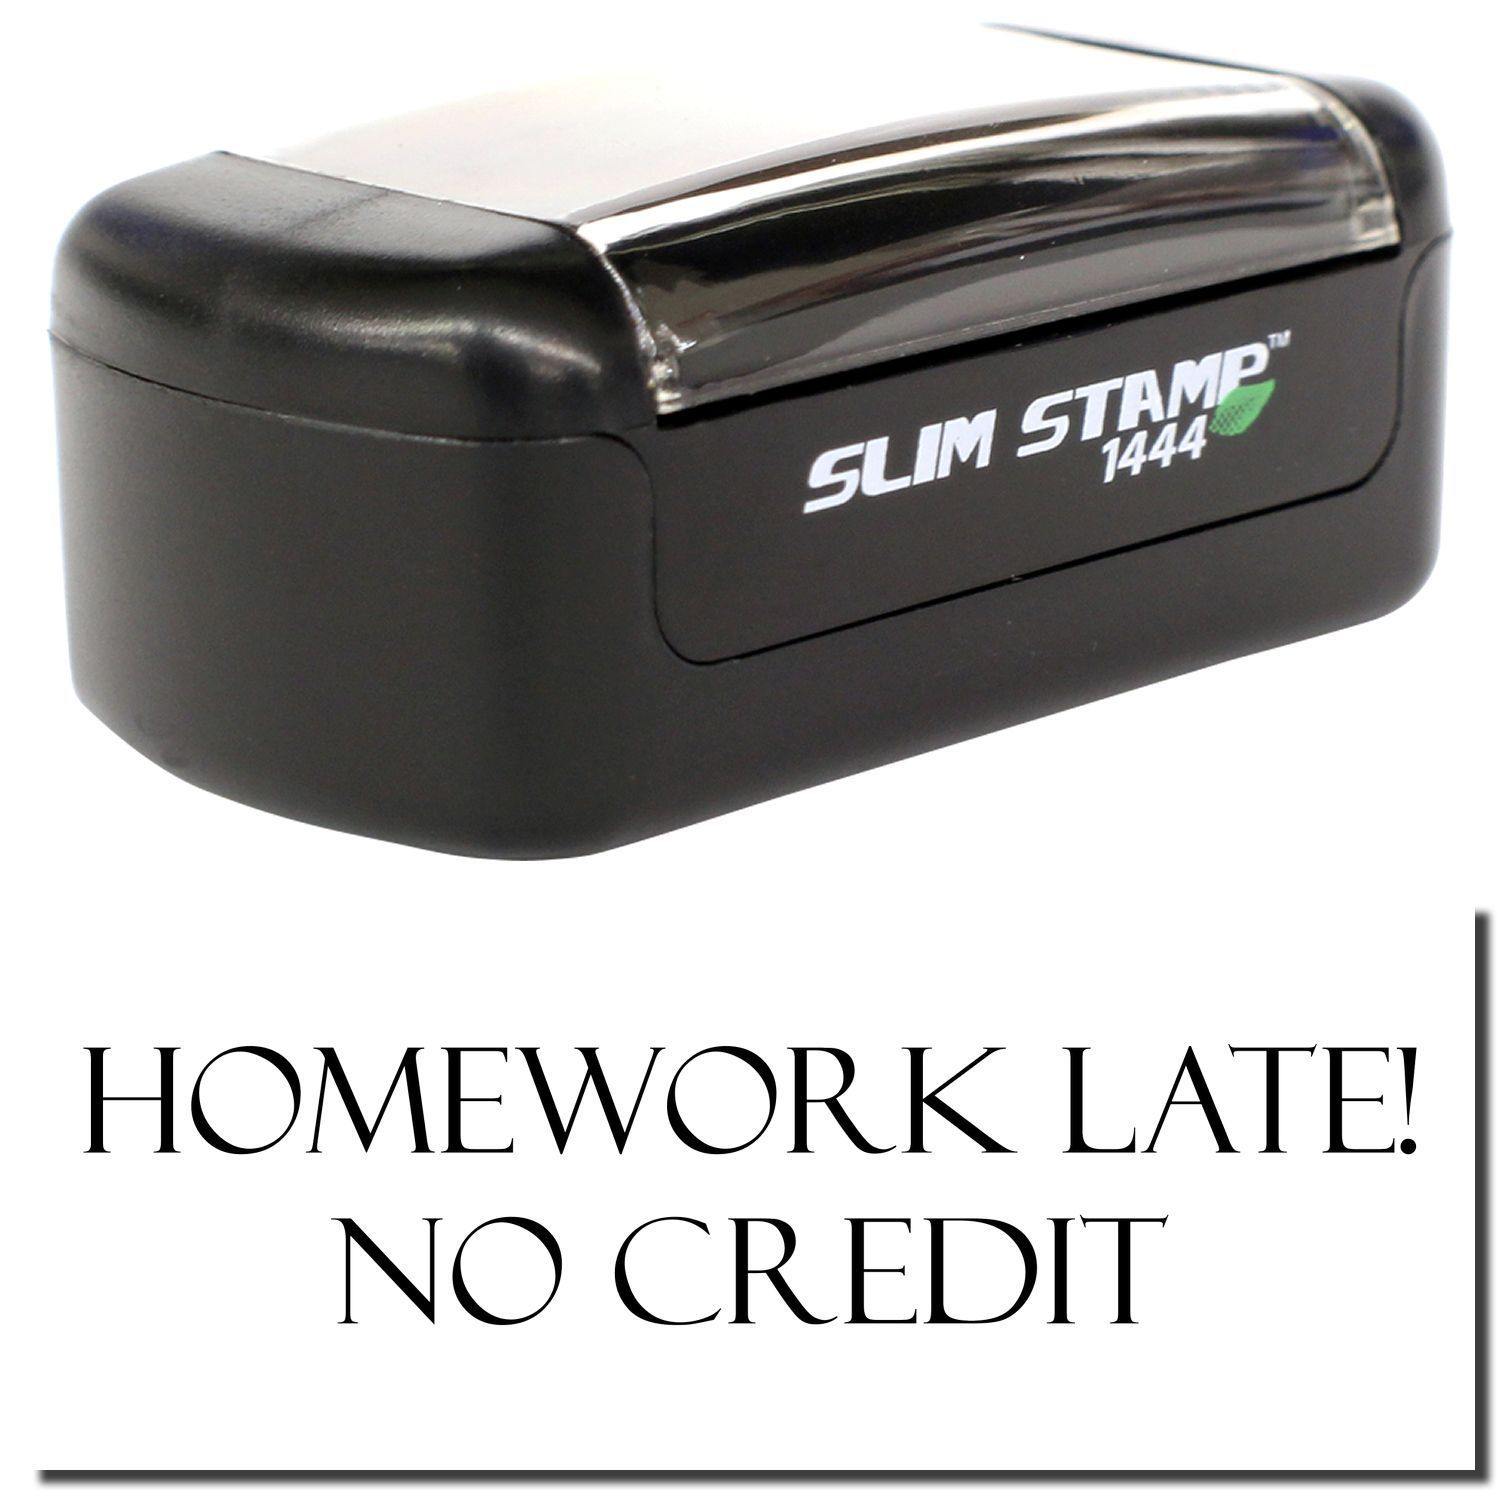 A stock office pre-inked stamp with a stamped image showing how the text "HOMEWORK LATE! NO CREDIT" is displayed after stamping.